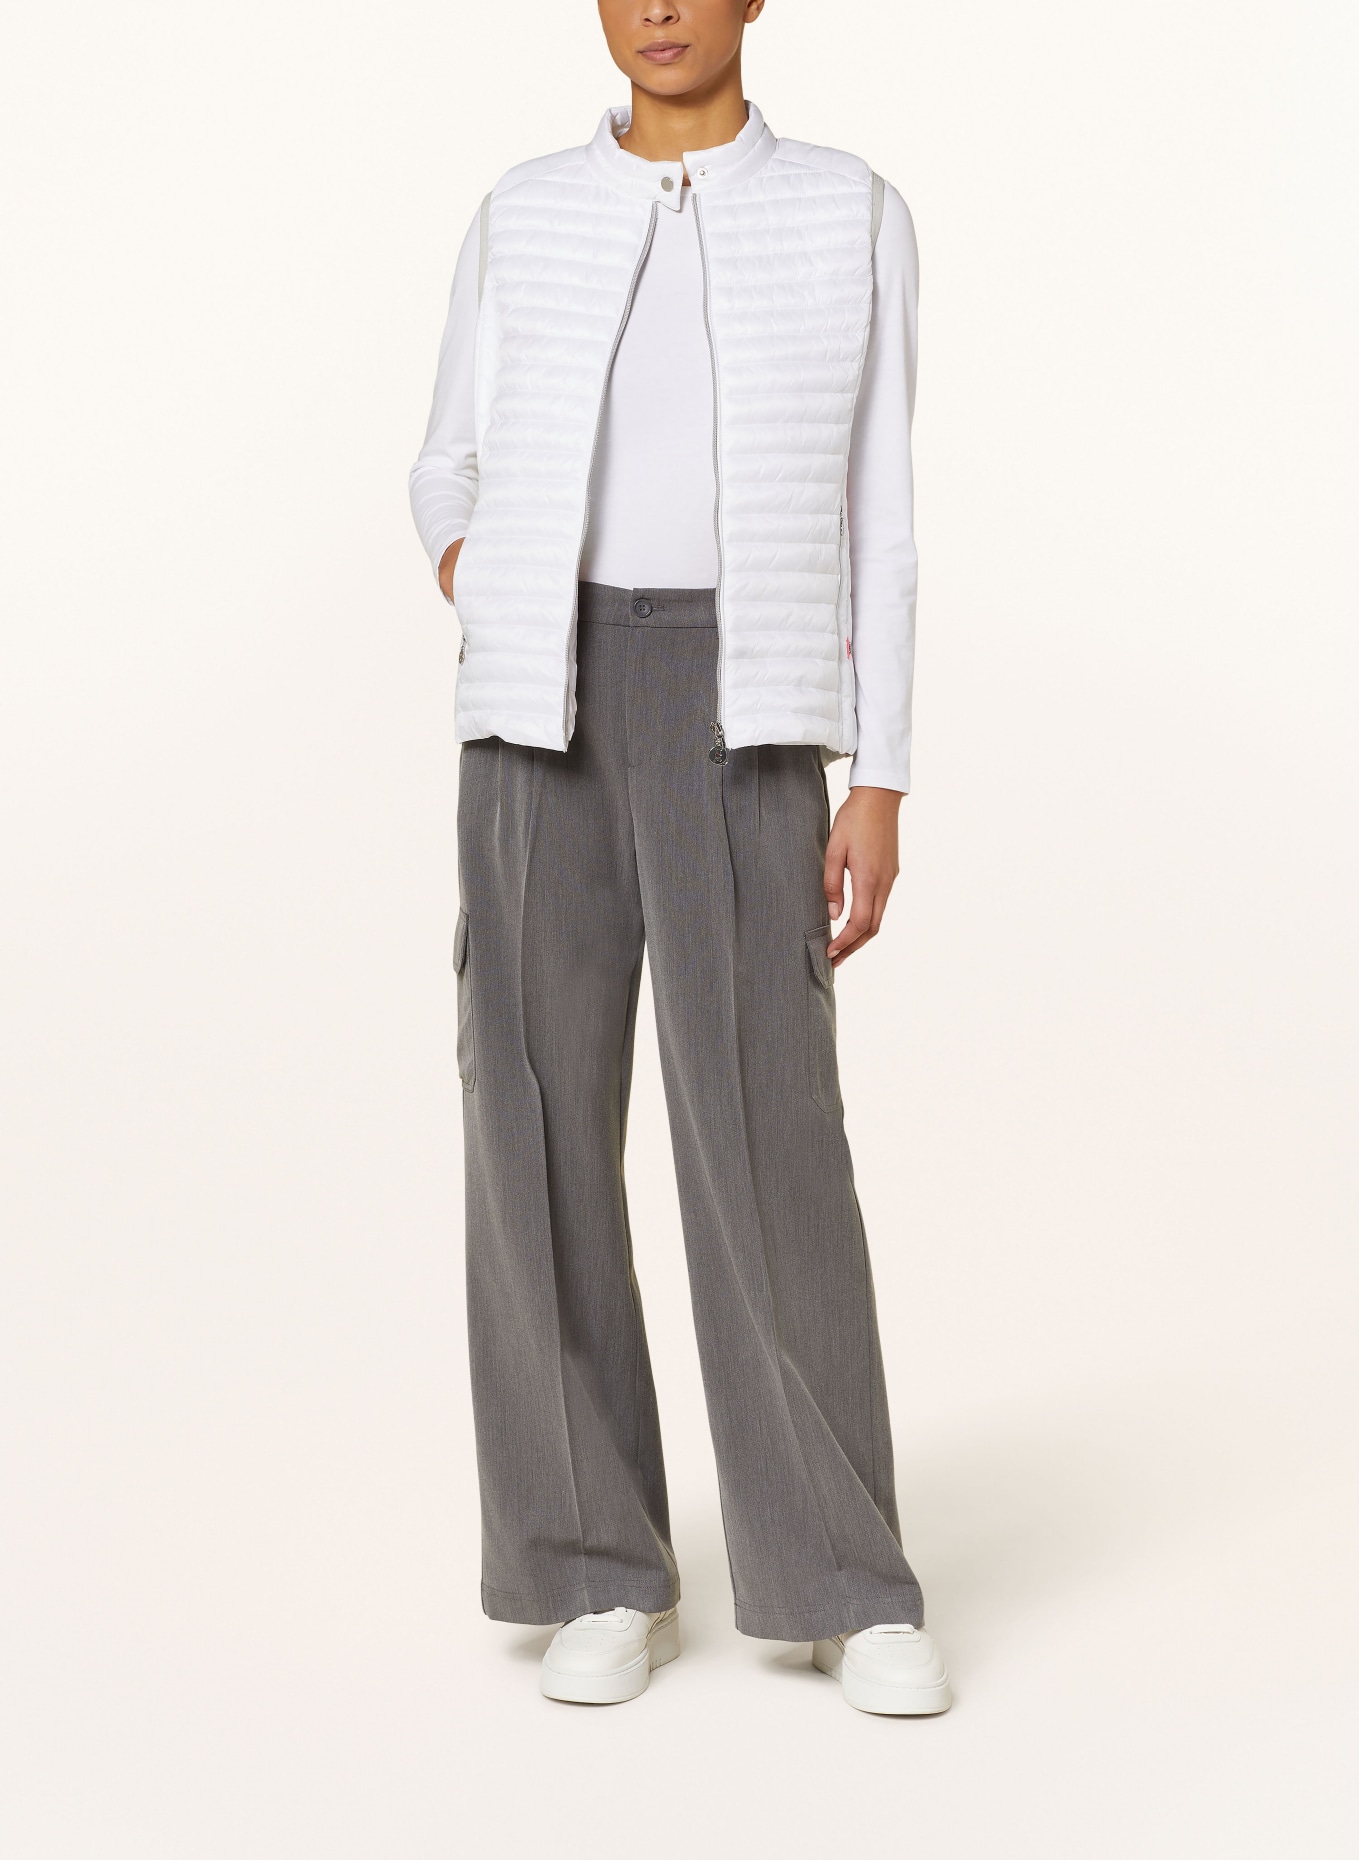 FRIEDA & FREDDIES Quilted vest BIBY, Color: WHITE/ LIGHT GRAY (Image 2)